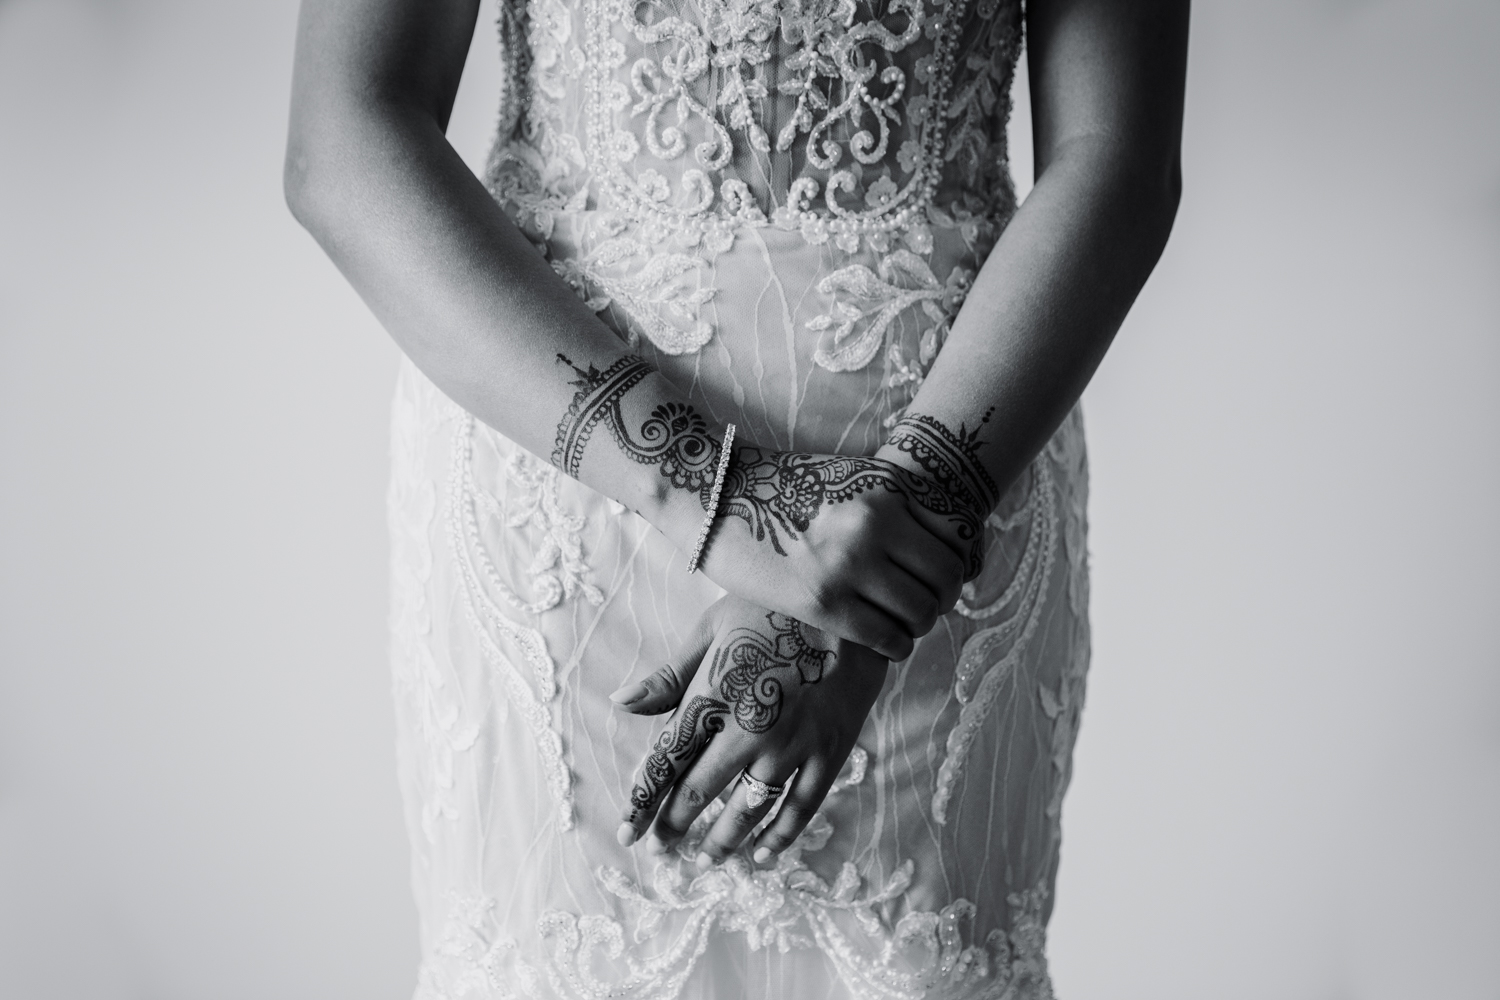 A stunning bridal portrait of a Bride taken just before leaving home for the wedding. This image was taken by Mala Photography, an Auckland based wedding photographer. The wedding was at Markovina Vineyard Estate In Kumeu, Auckland.